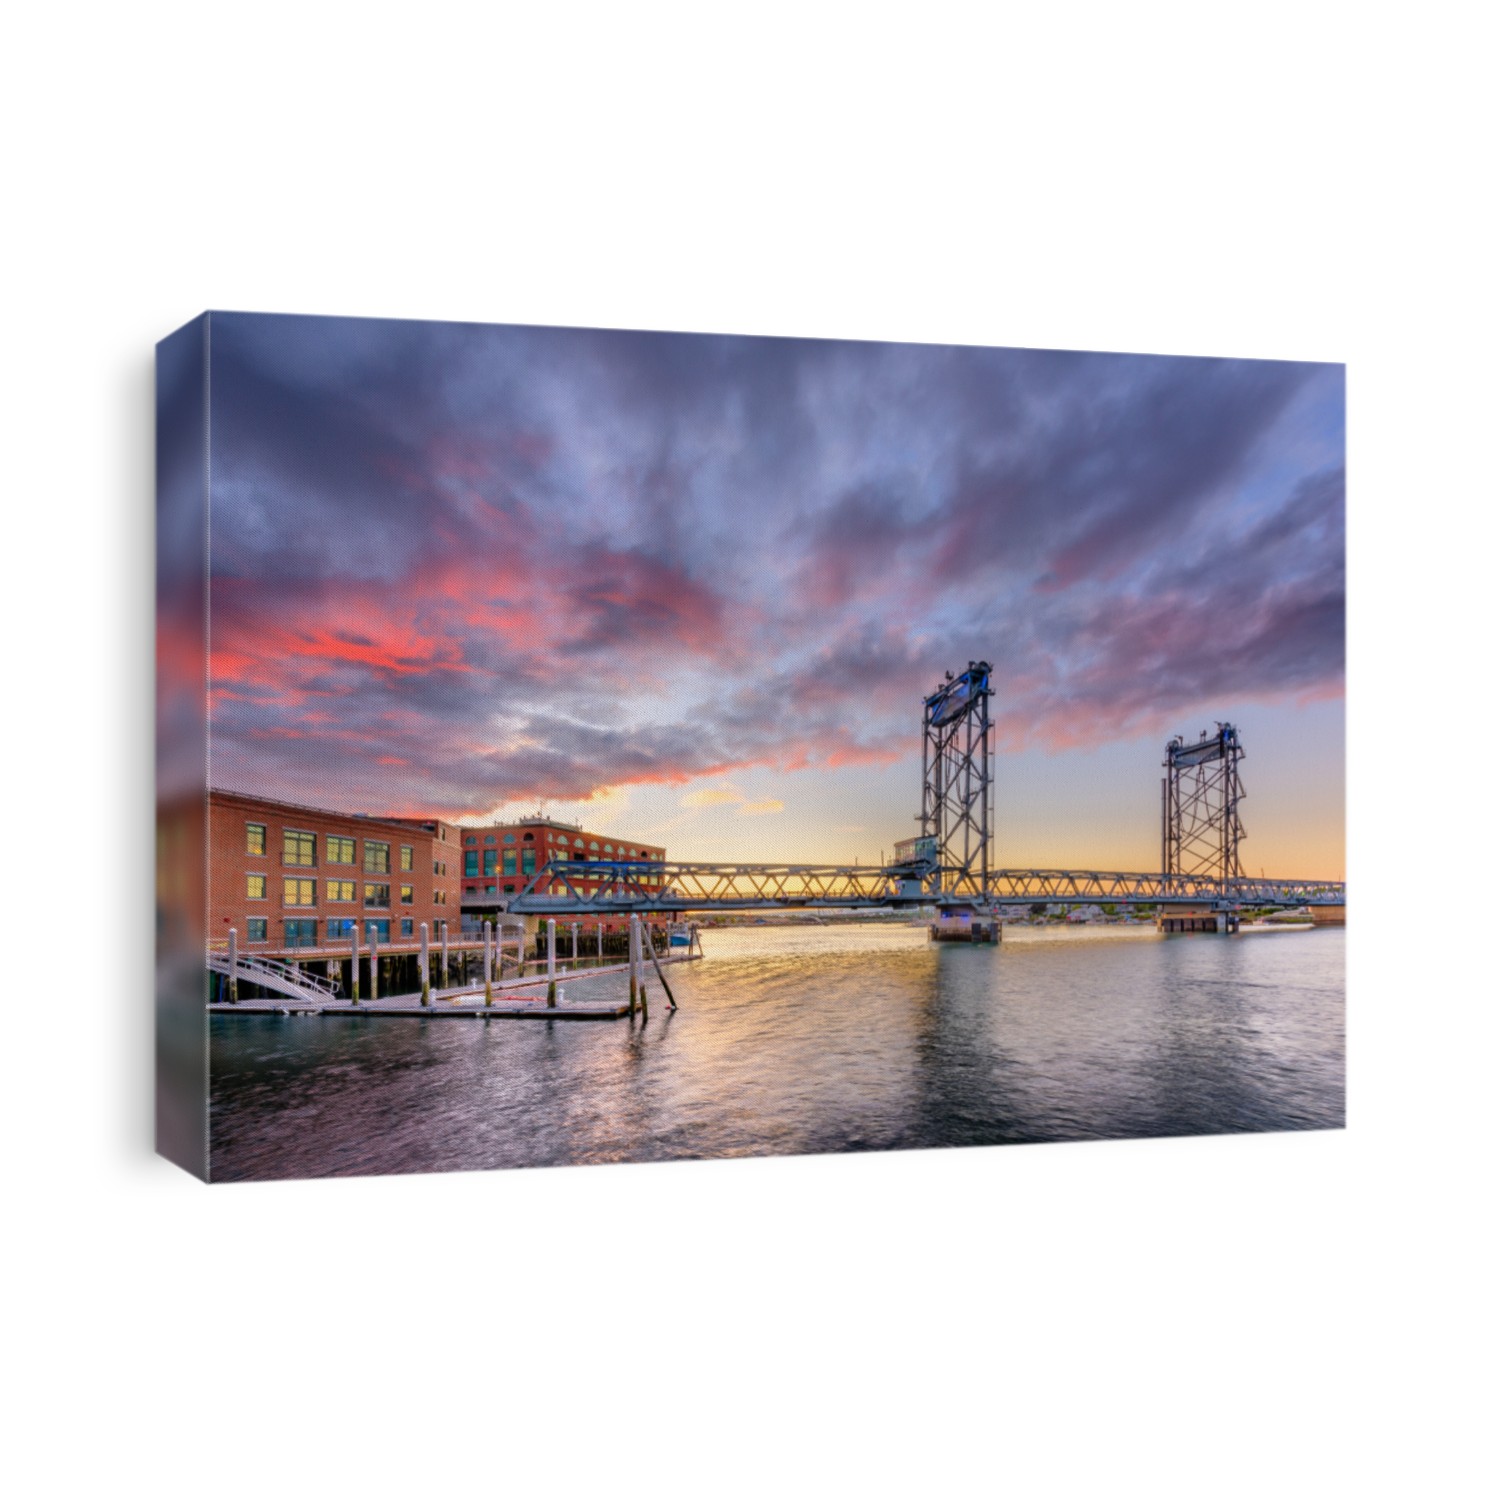 Portsmouth, New Hampshire, USA at Memorial Bridge on the Piscataqua River at dusk.